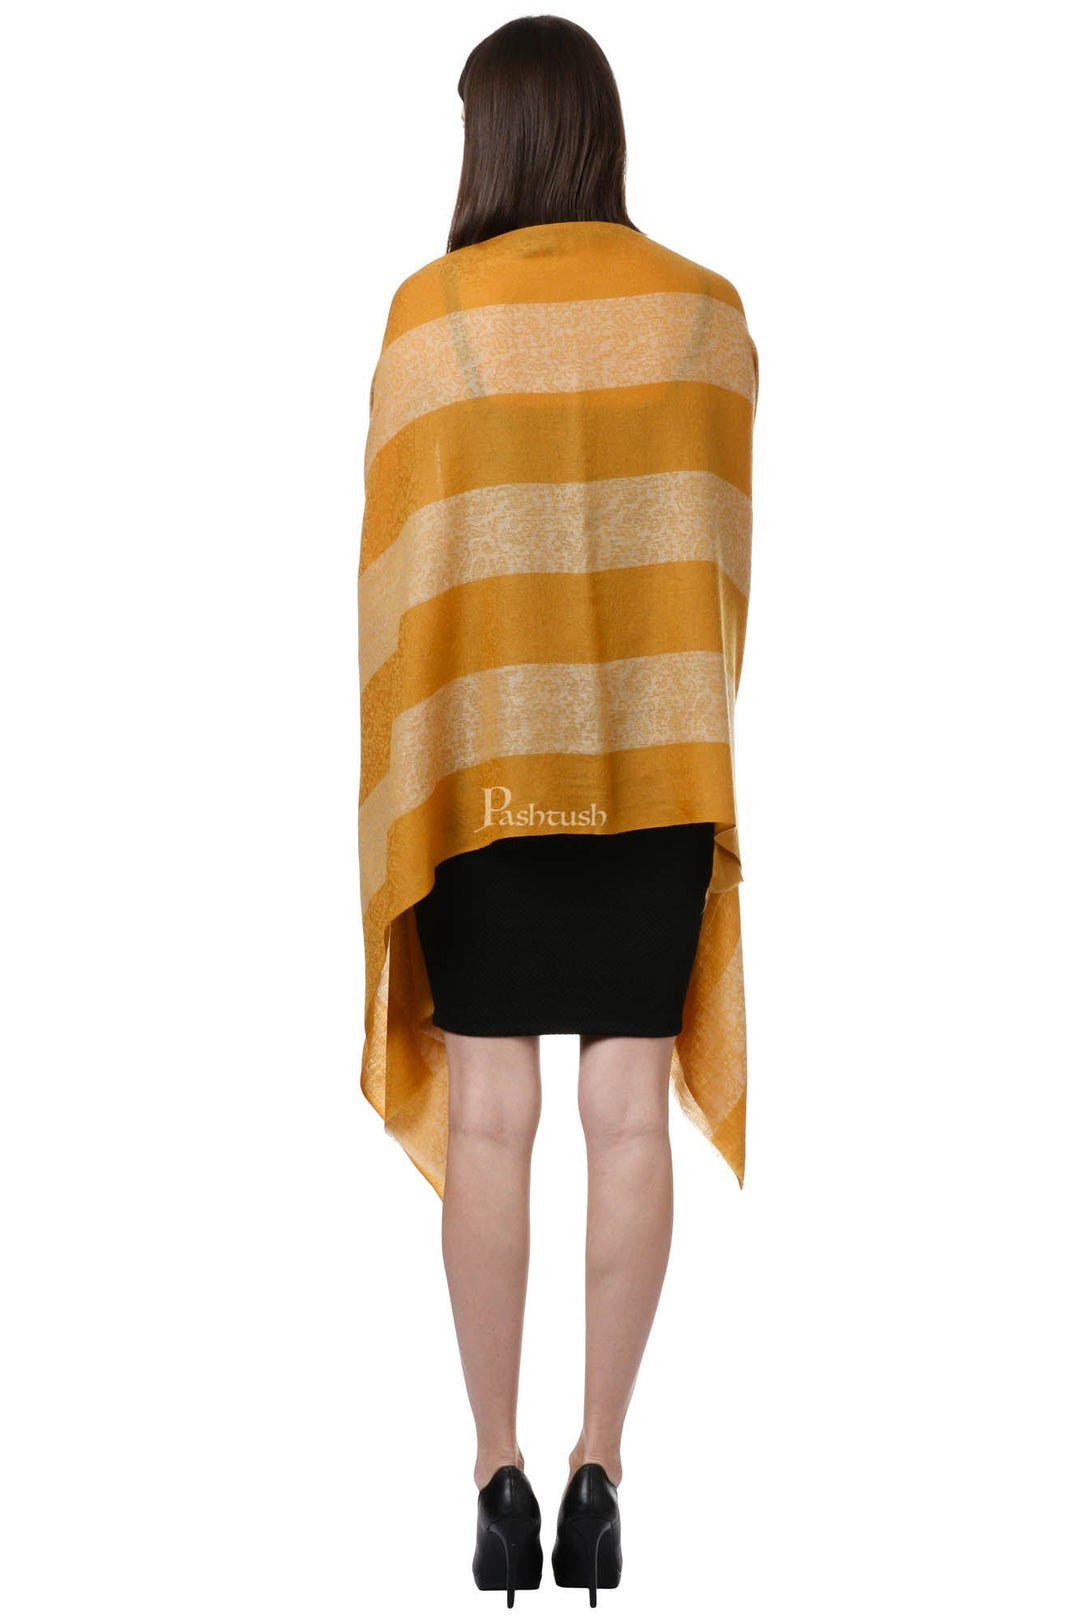 Pashtush India Womens Stoles and Scarves Scarf Pashtush Fine Wool Luxury Striped Design Scarf, Stole, Weaving Design - Mustard